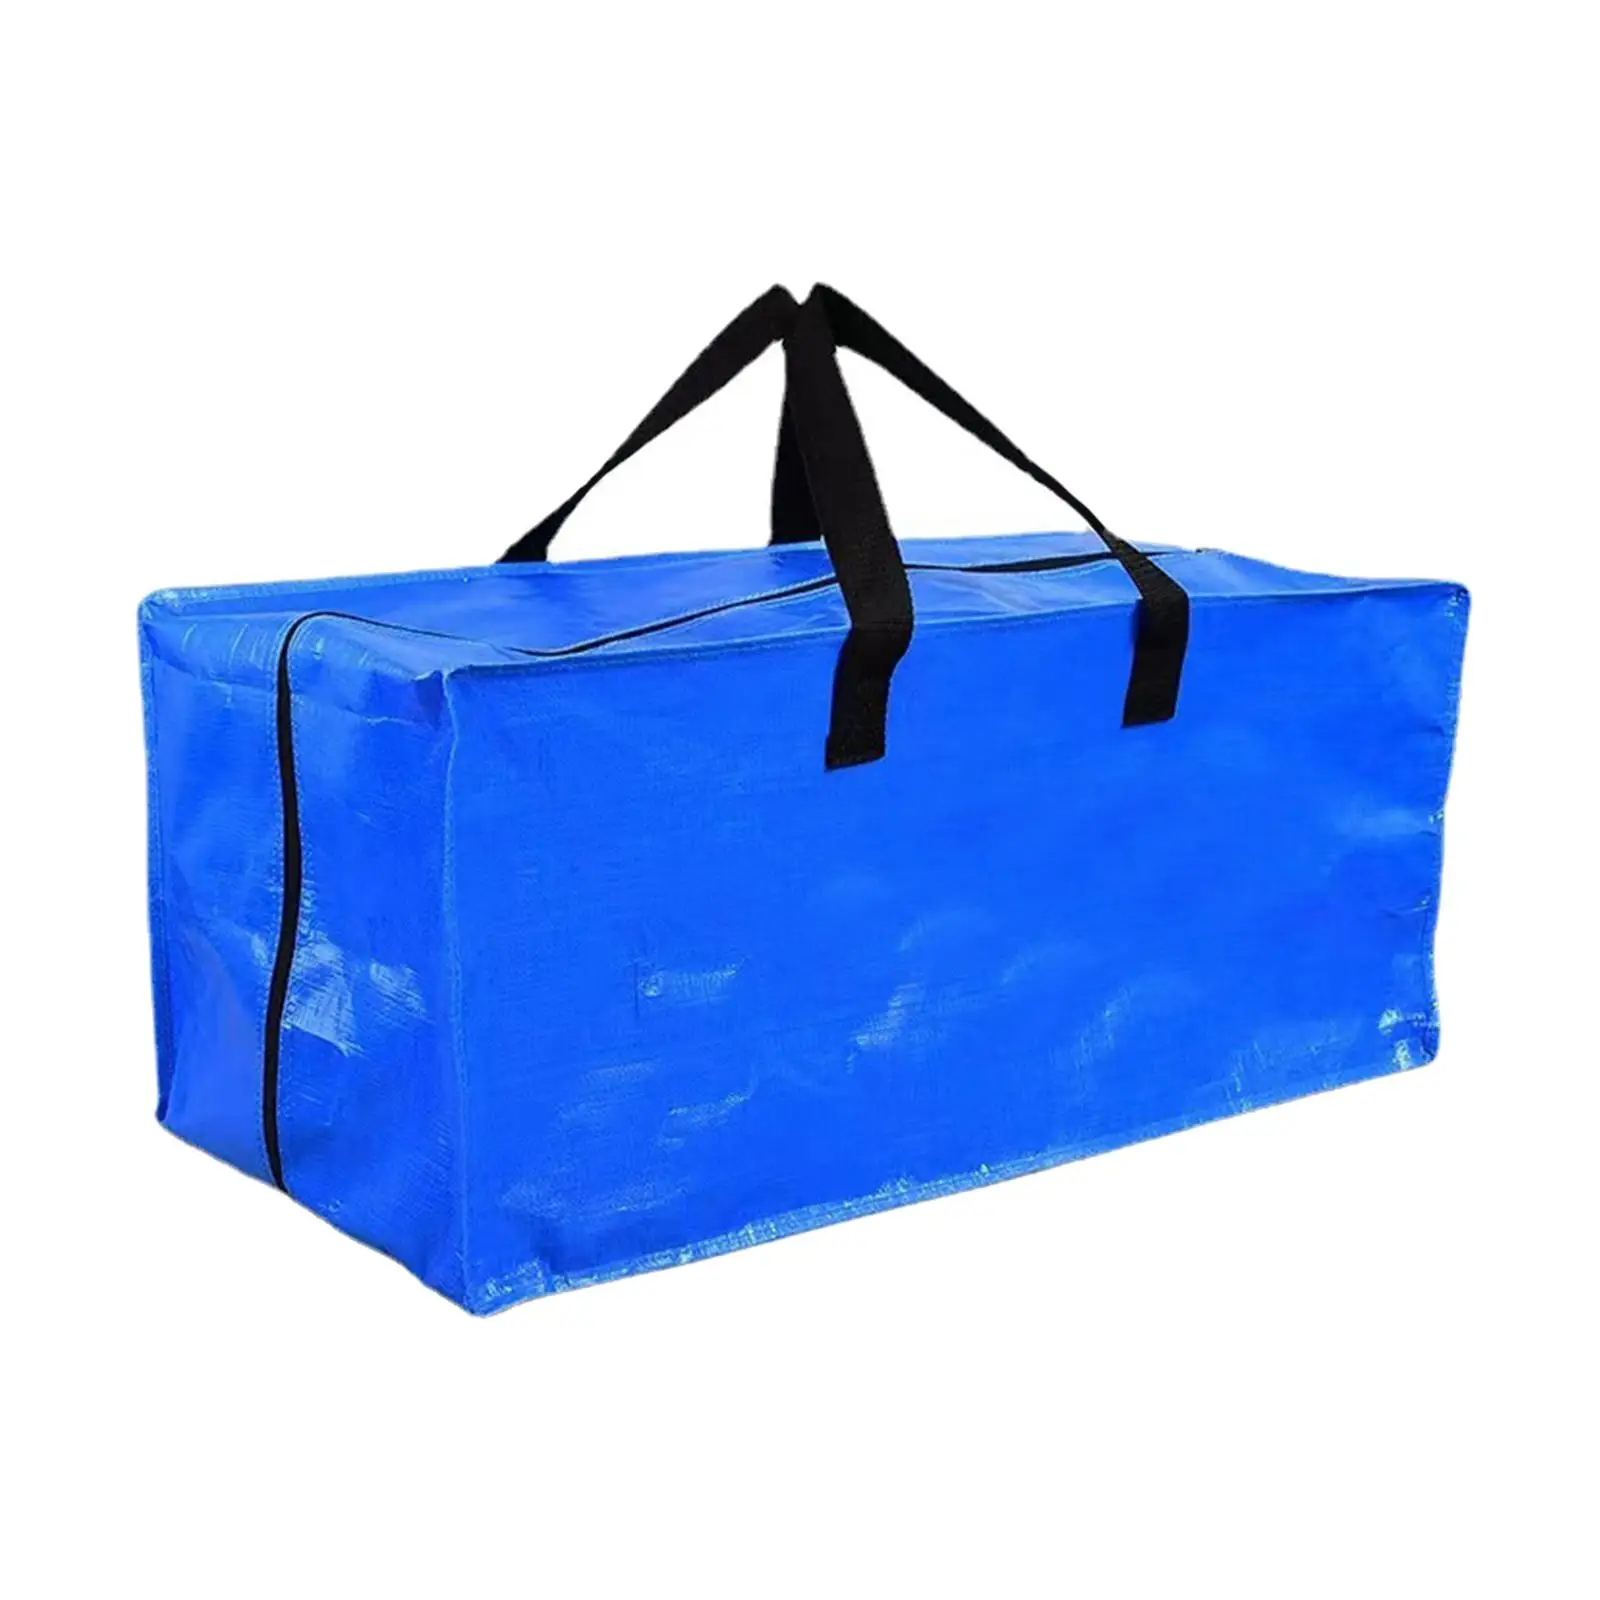 Heavy Duty Large Moving Bags Reusable Double Handles Lightweight Storage Totes for Laundry Travel Garage Bedding Blanket Clothes